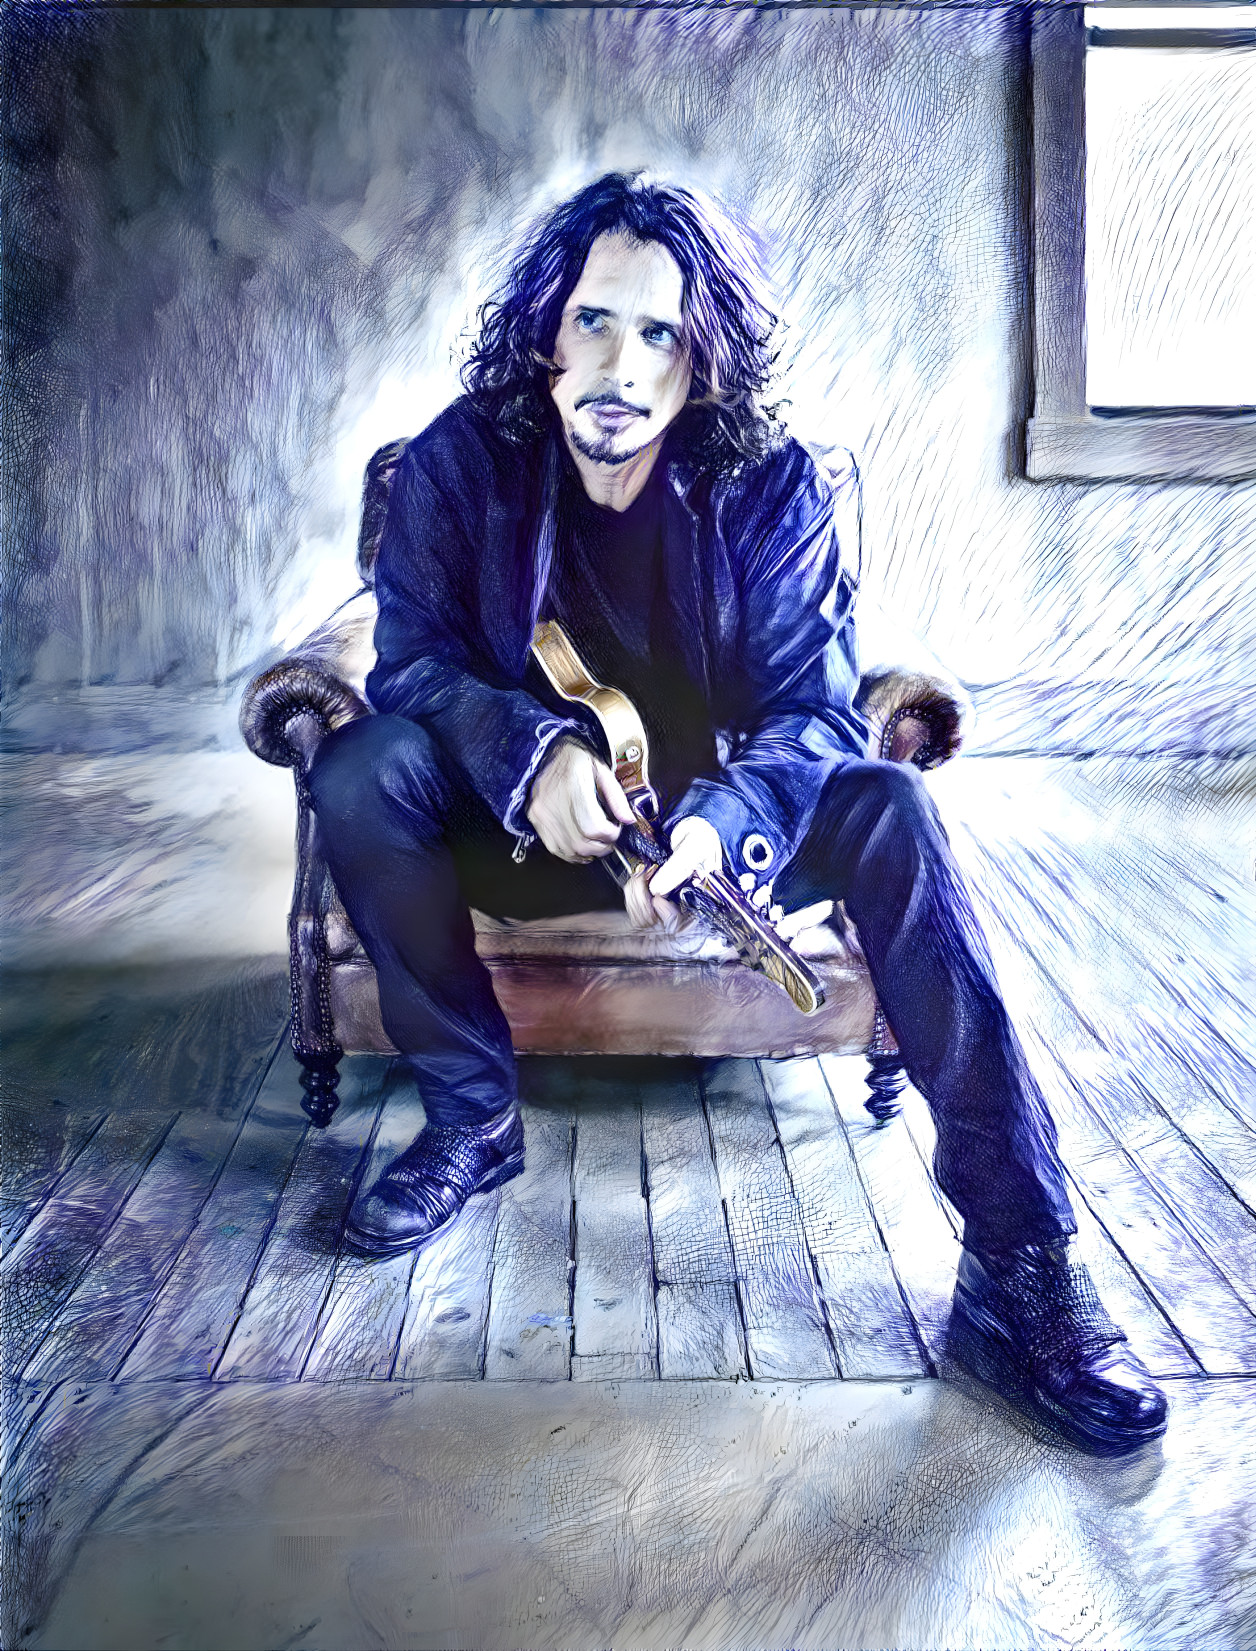 The late Chris Cornell 